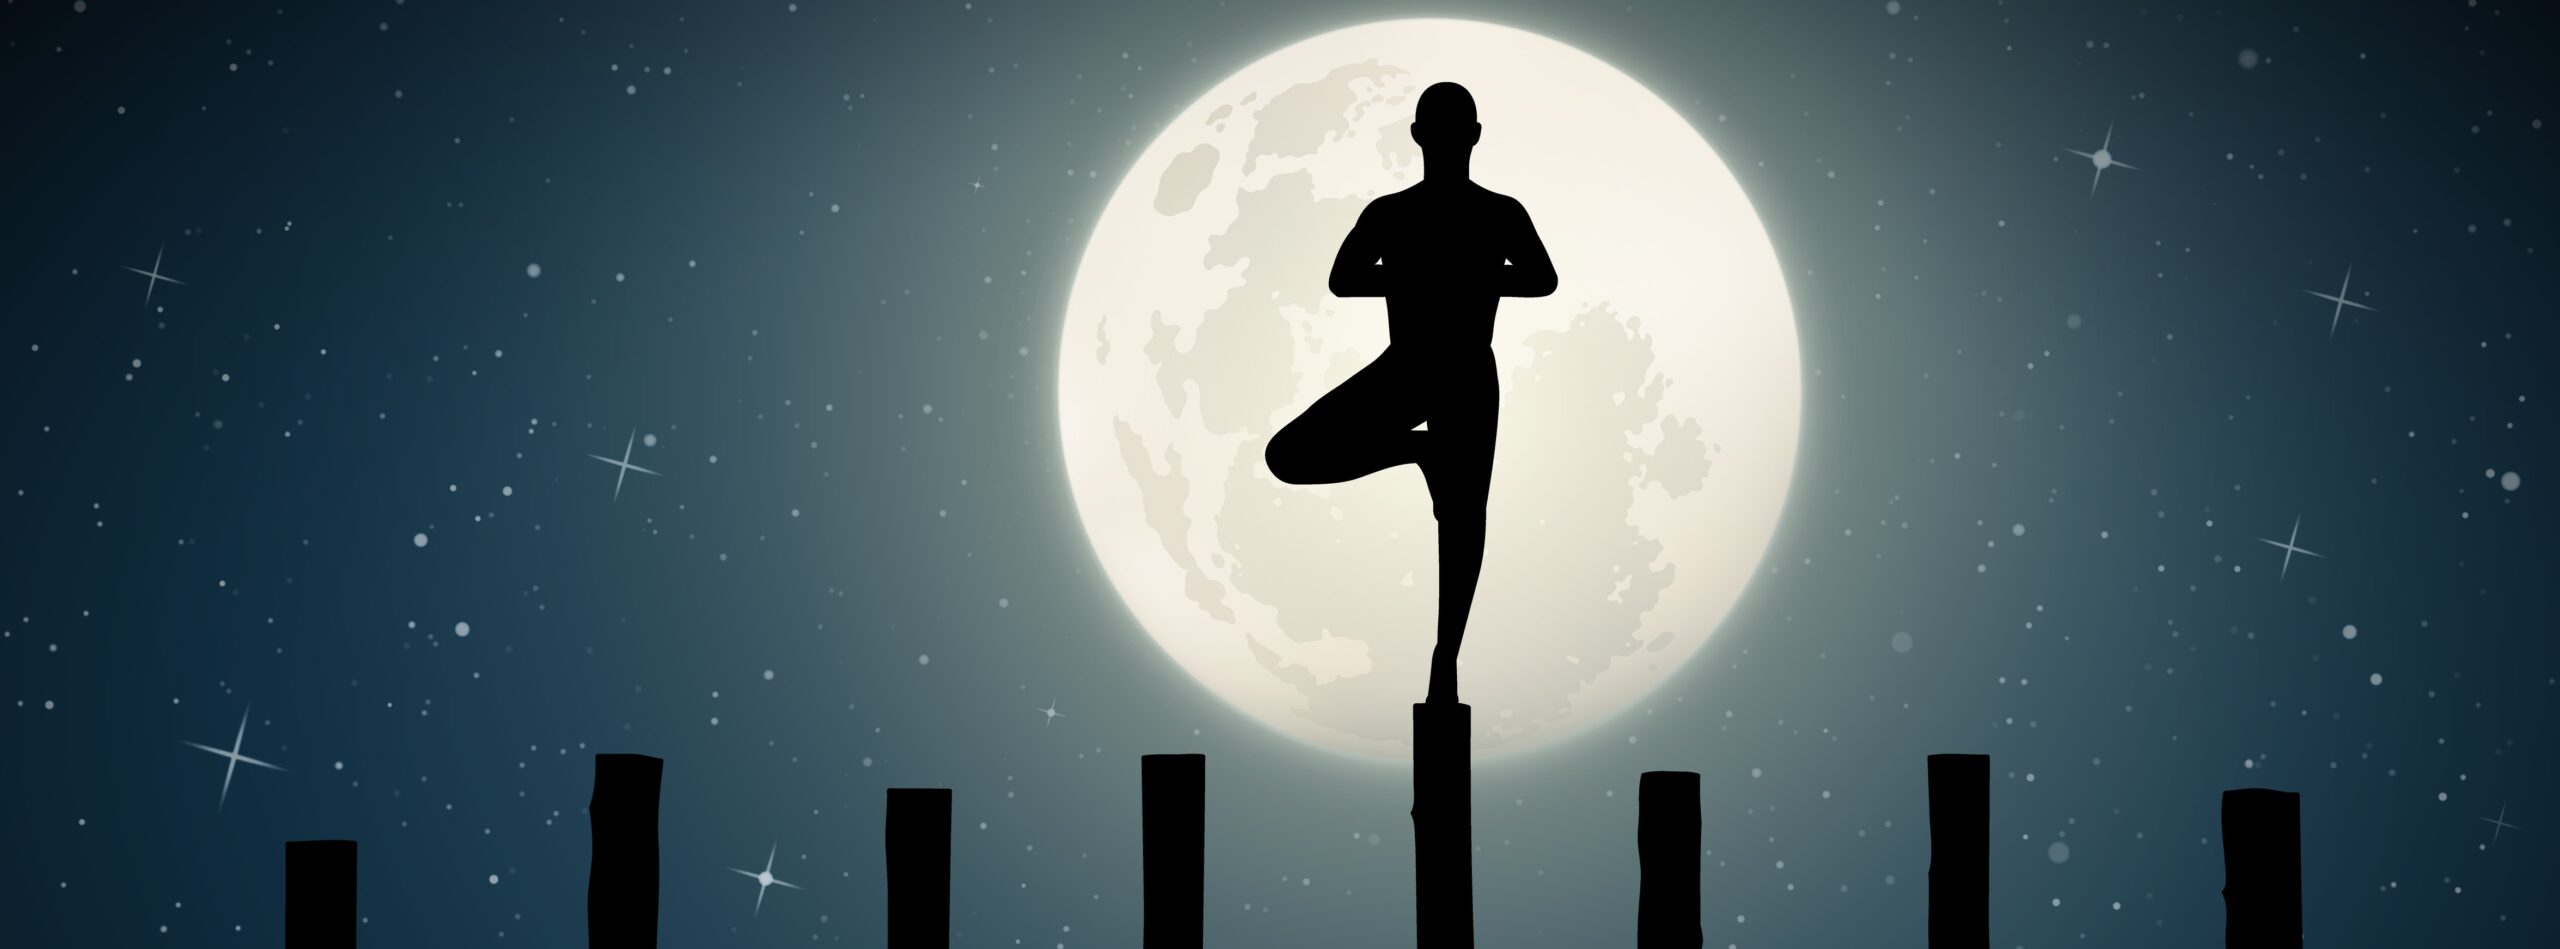 Finding Balance with the Full Moon in Libra – the Relationship Sign